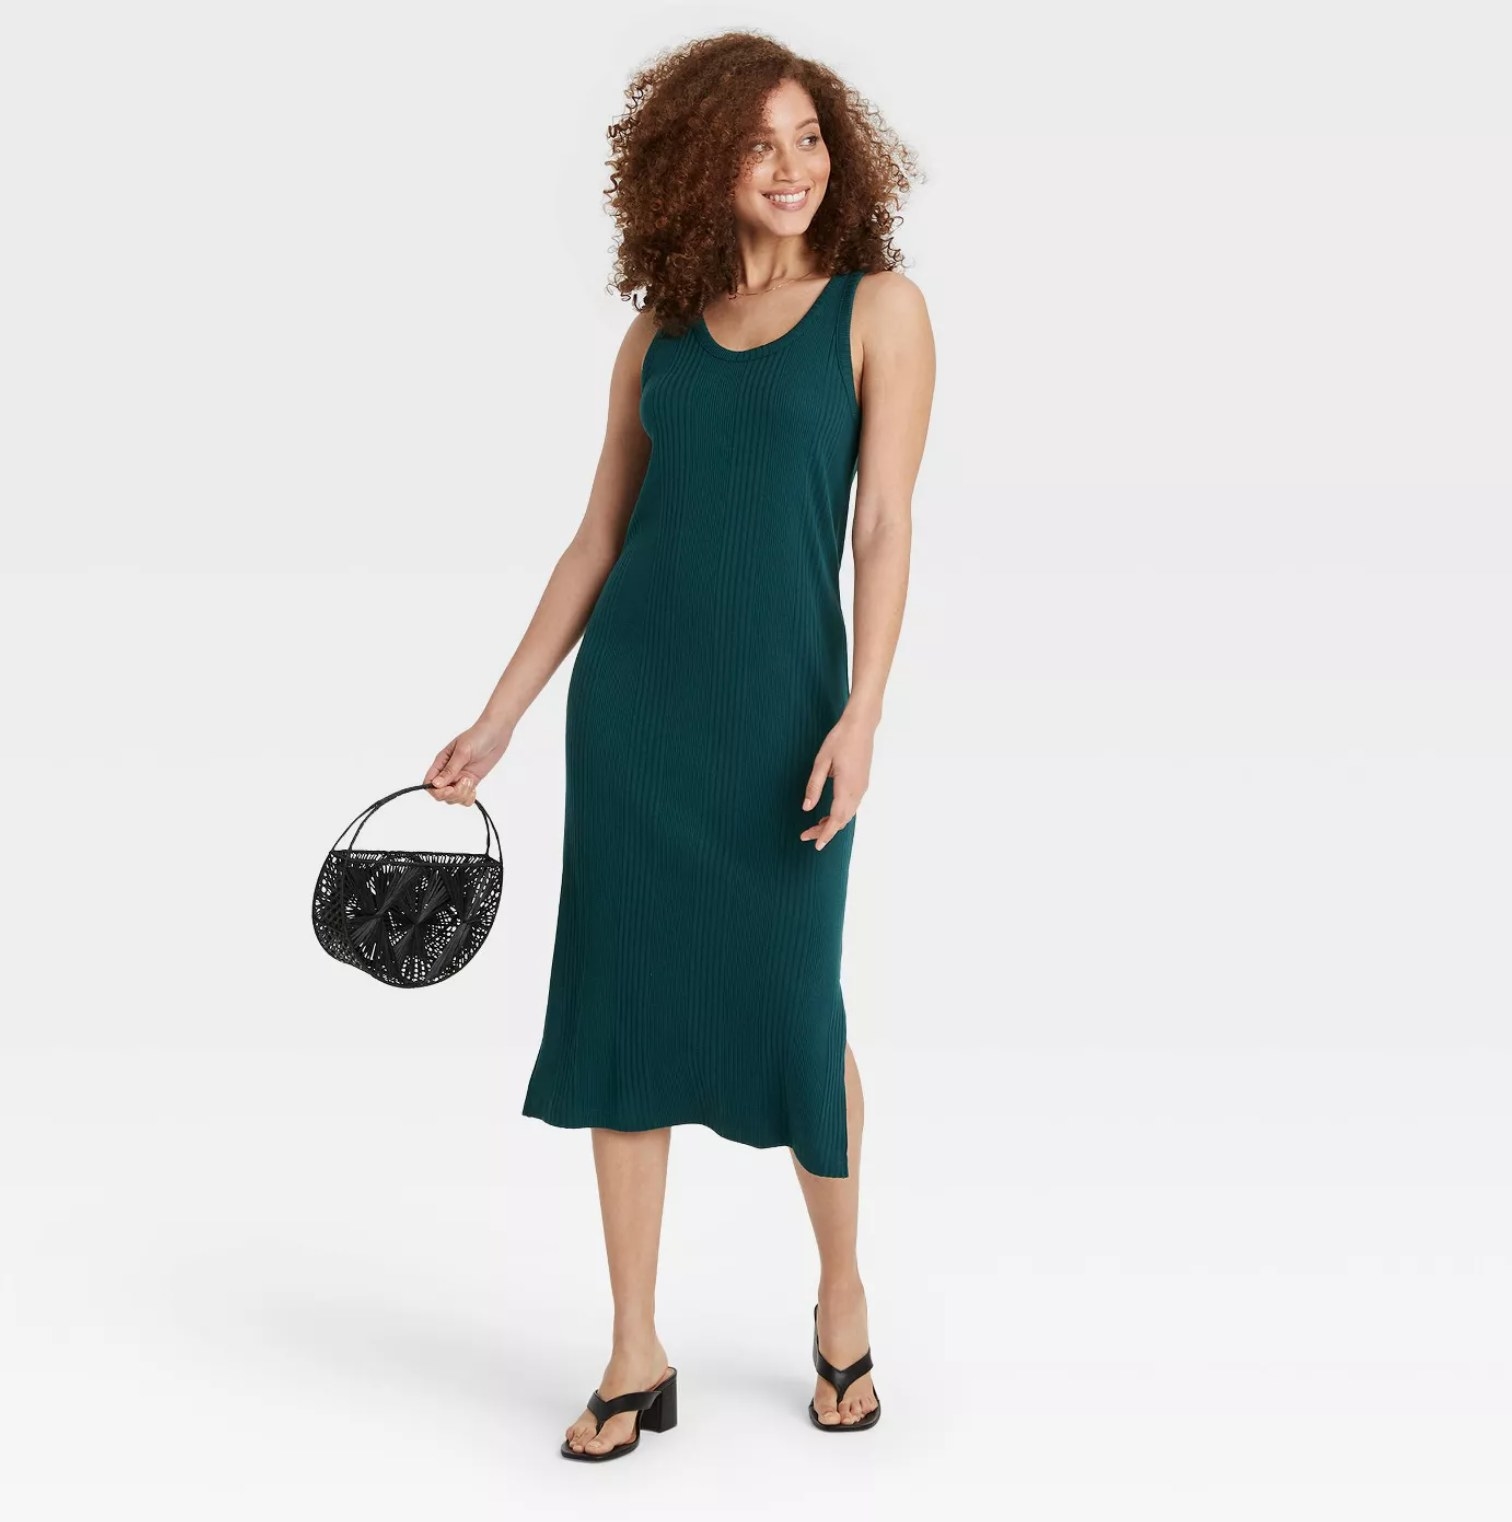 model wearing the ribbed dress in green with black flip flops carrying a black handbag